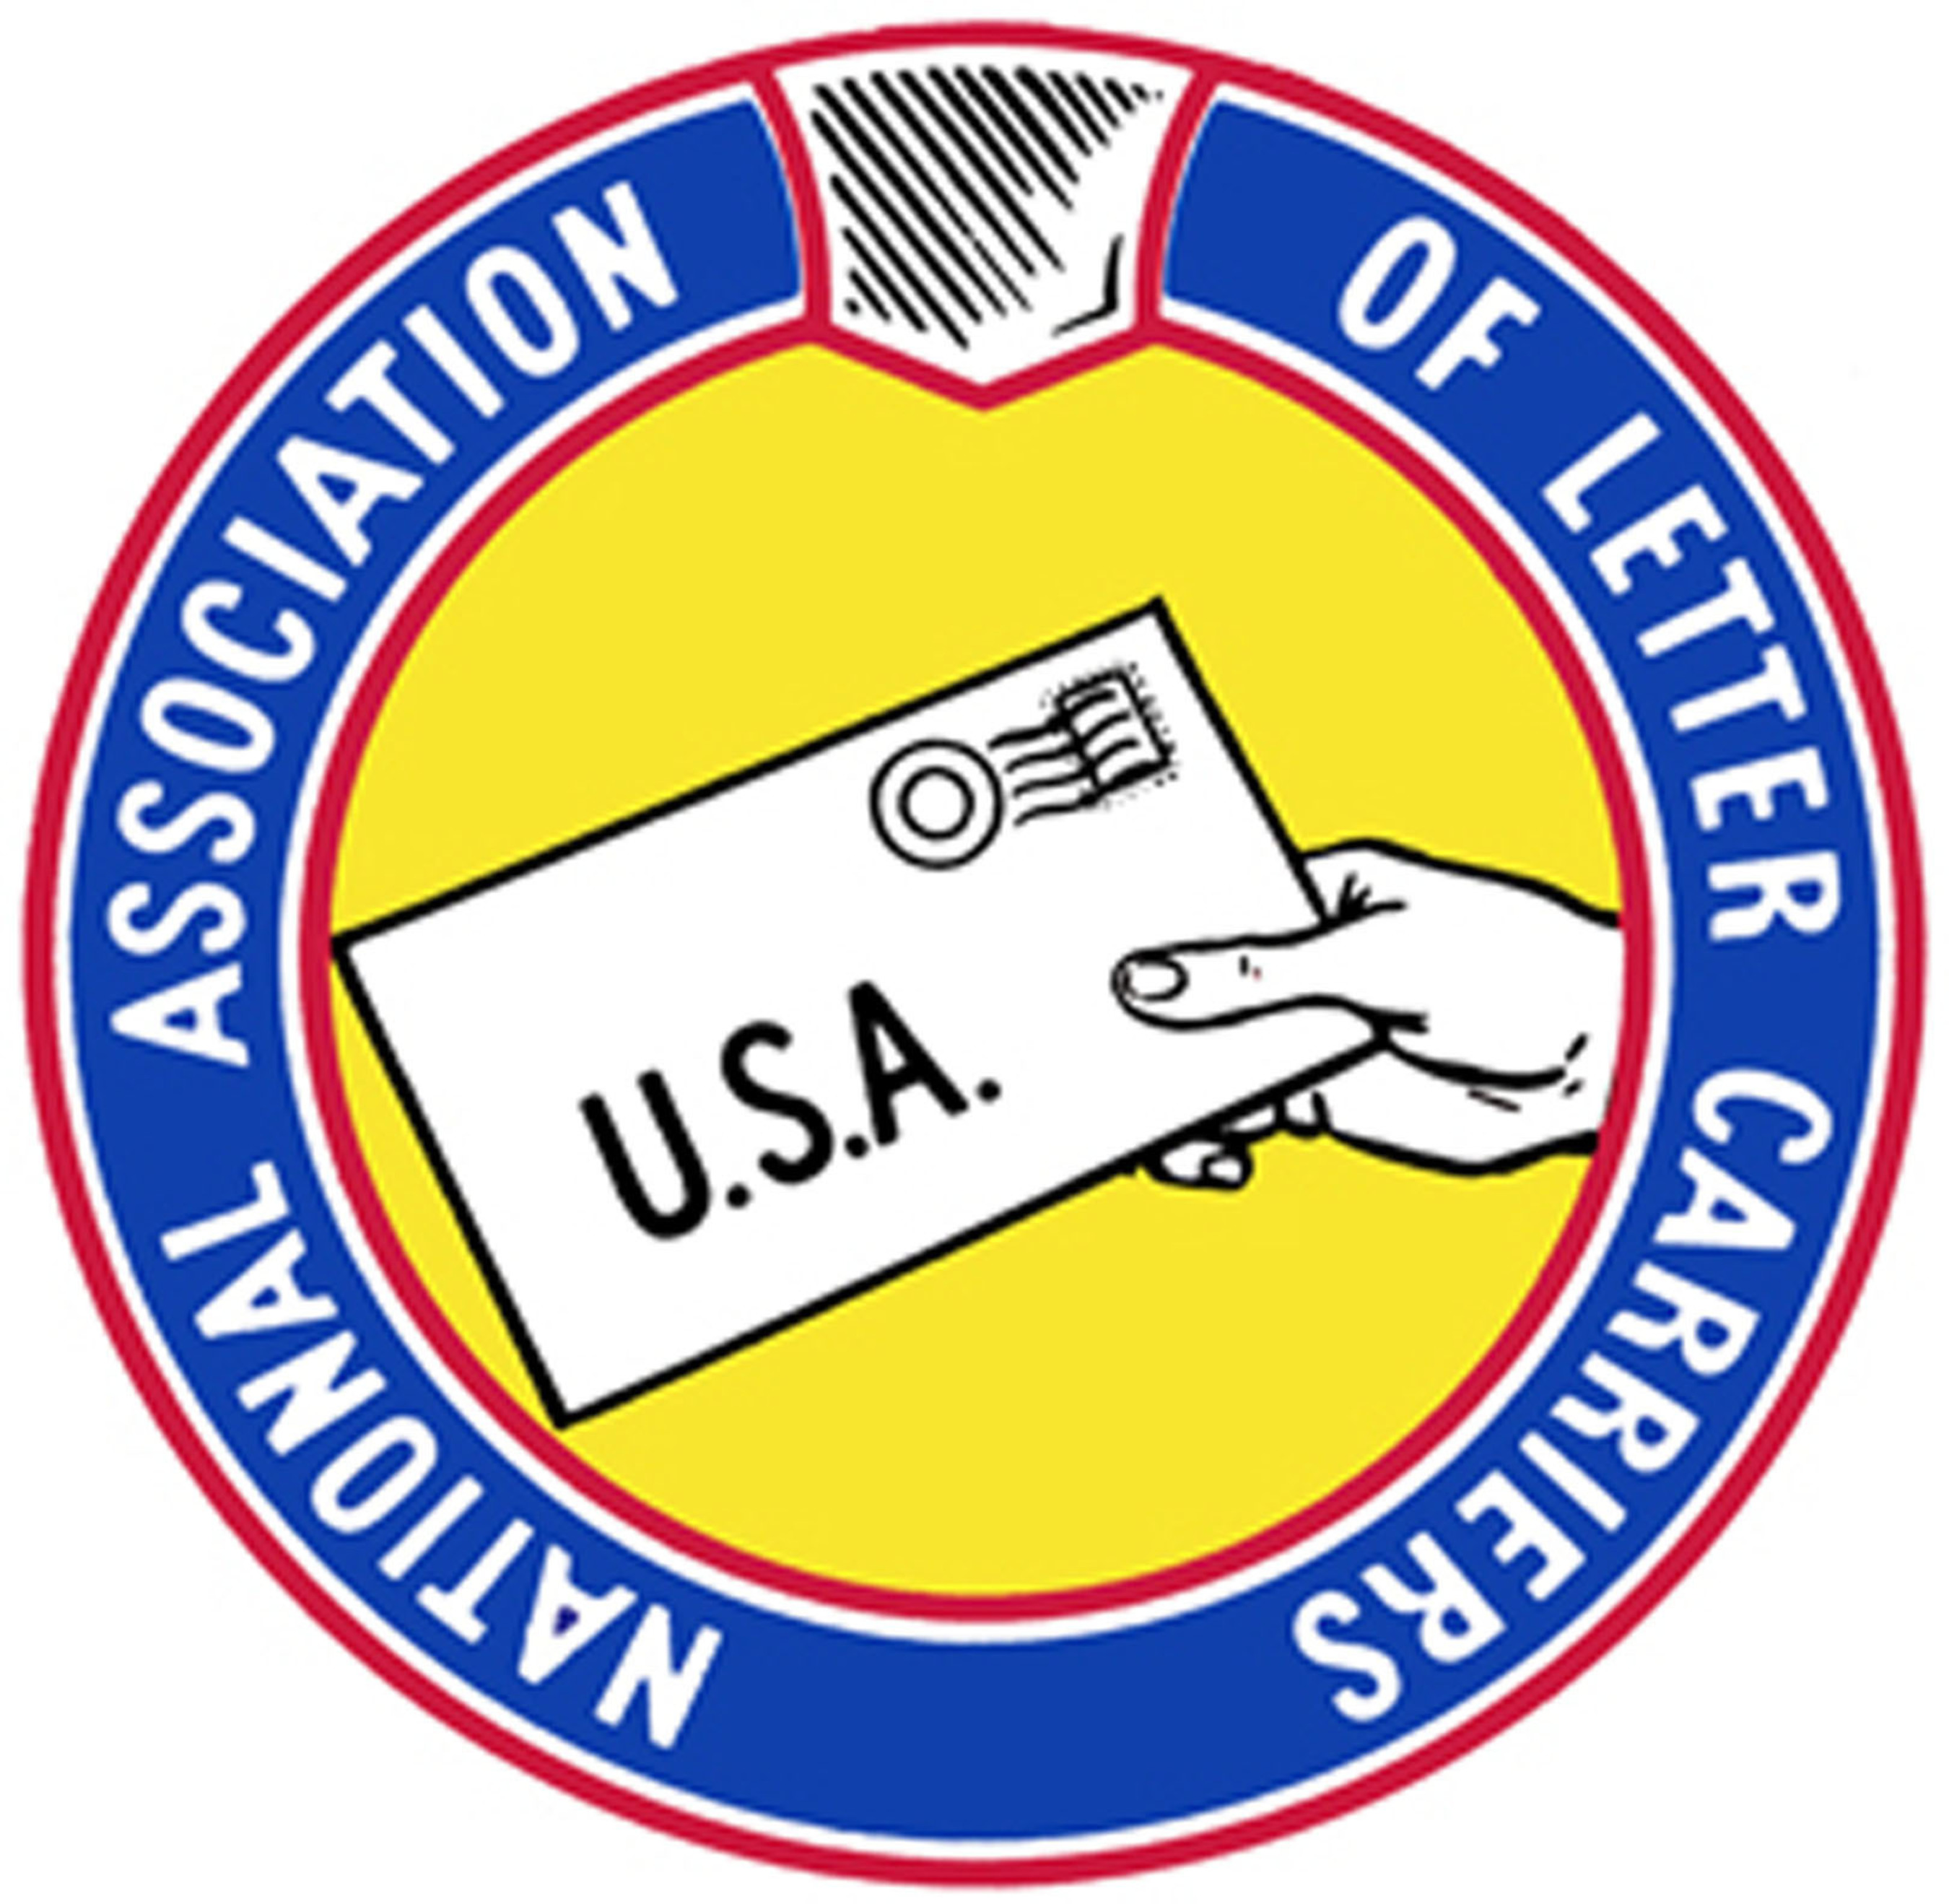 National Association of Letter Carriers. (PRNewsFoto/National Association of Letter Carriers) (PRNewsFoto/)